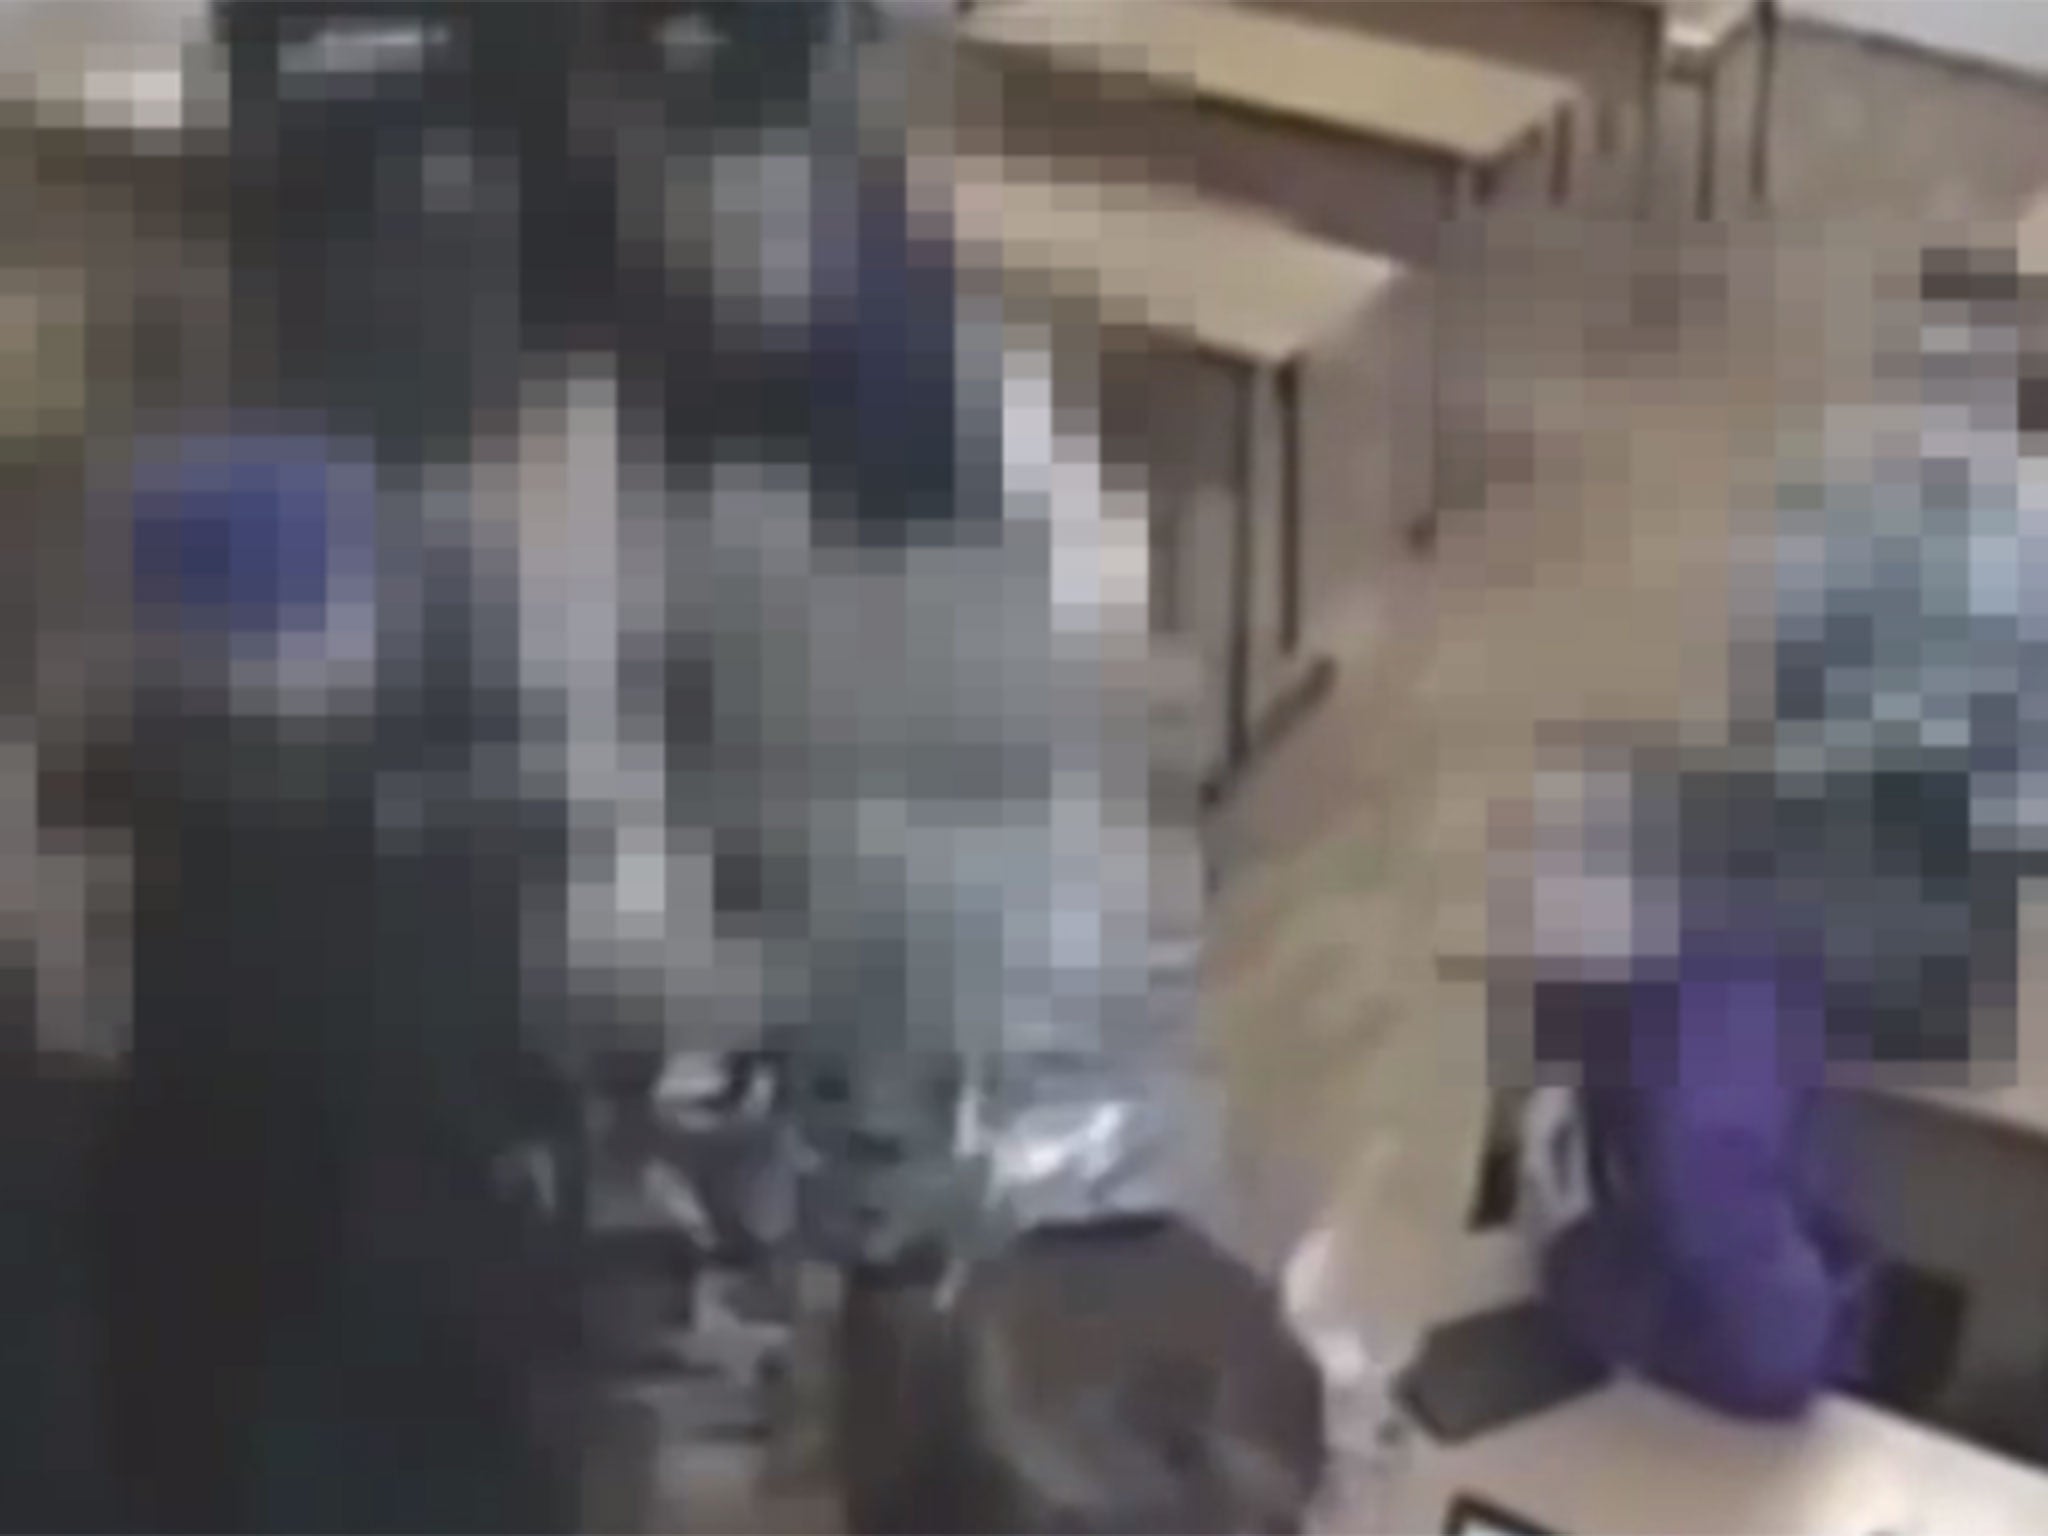 Shocking video shows moment Russian teenager was wrapped in cling film and suffocated on classroom floor.